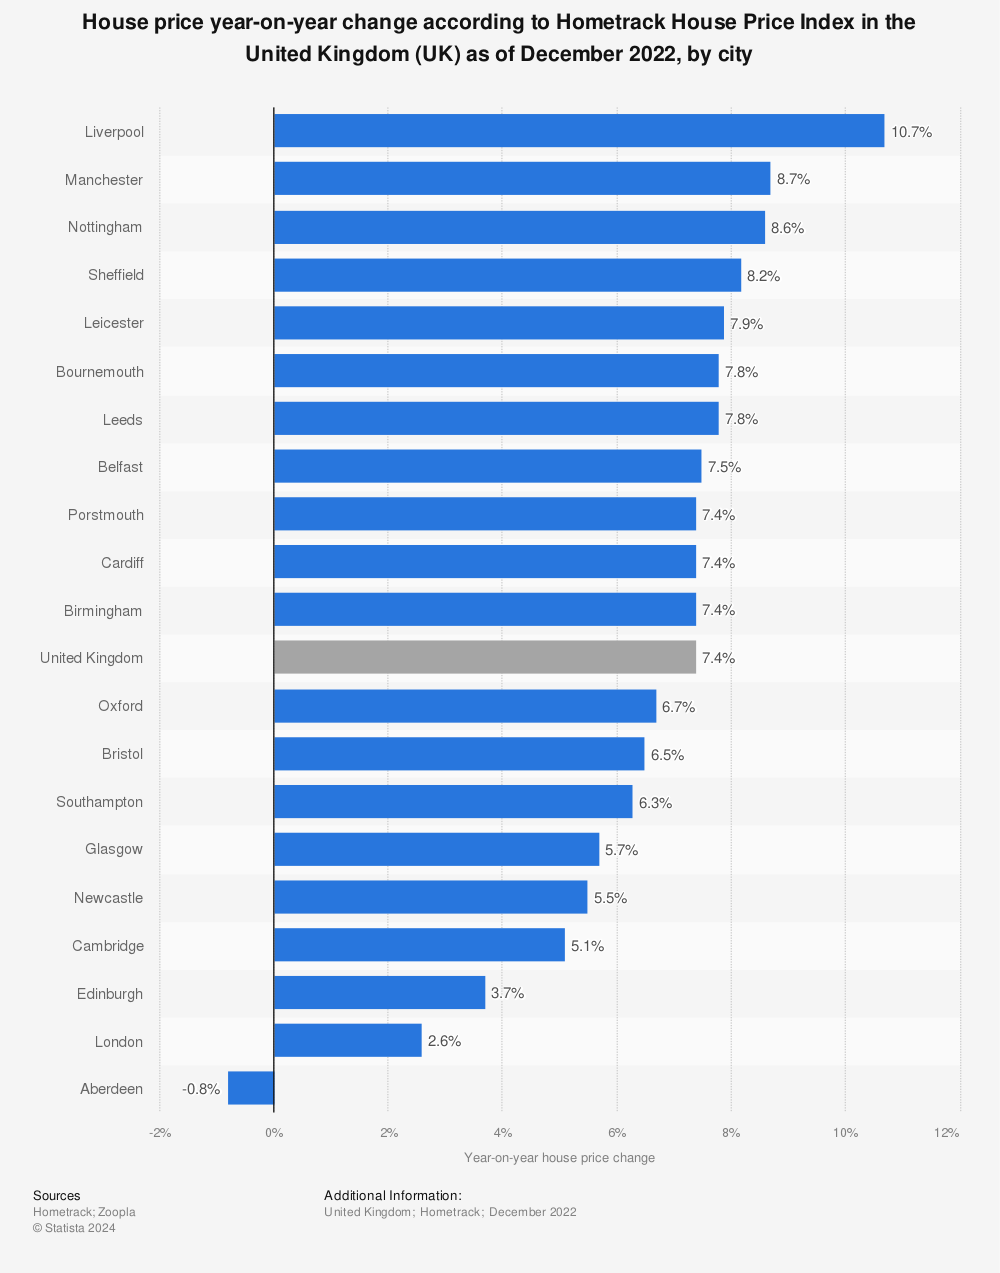 Statistic: House price year-on-year change according to Hometrack House Price Index in the United Kingdom (UK) as of December 2022, by city  | Statista